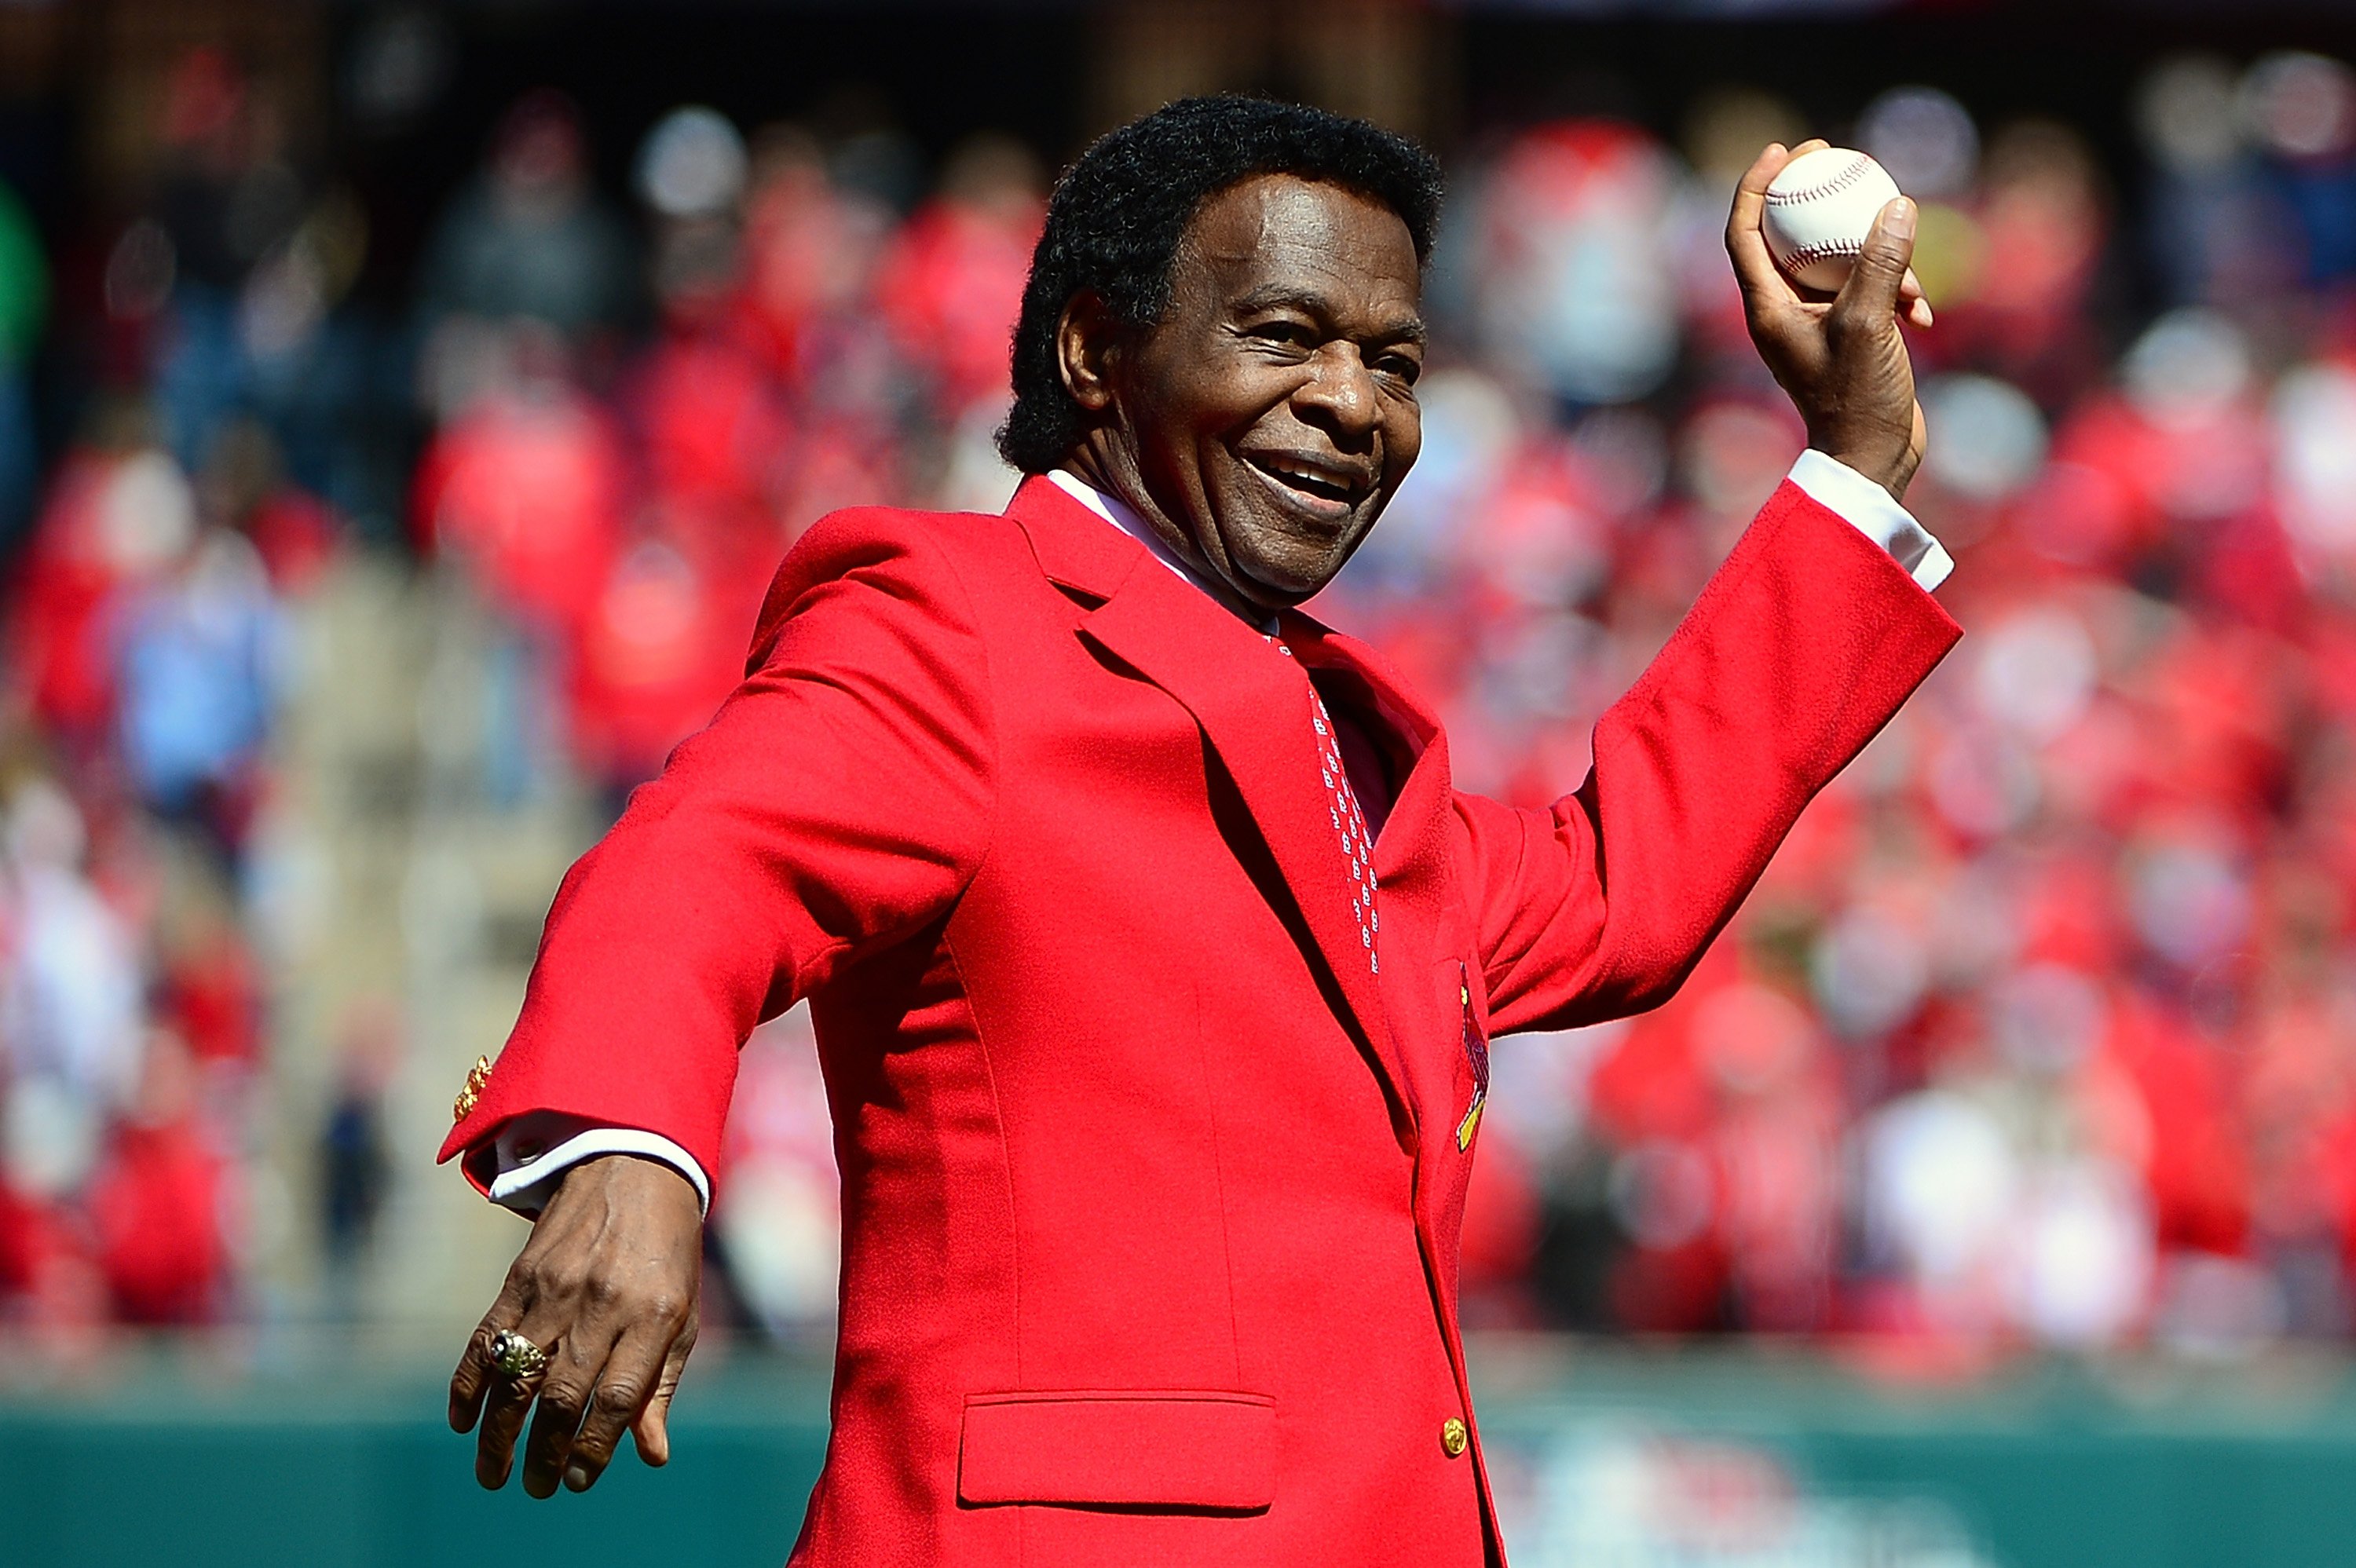 St. Louis Cardinals hall of famer Lou Brock throws out the first pitch at Busch Stadium on April 11, 2016 in St. Louis, Missouri. | Source: Getty Images